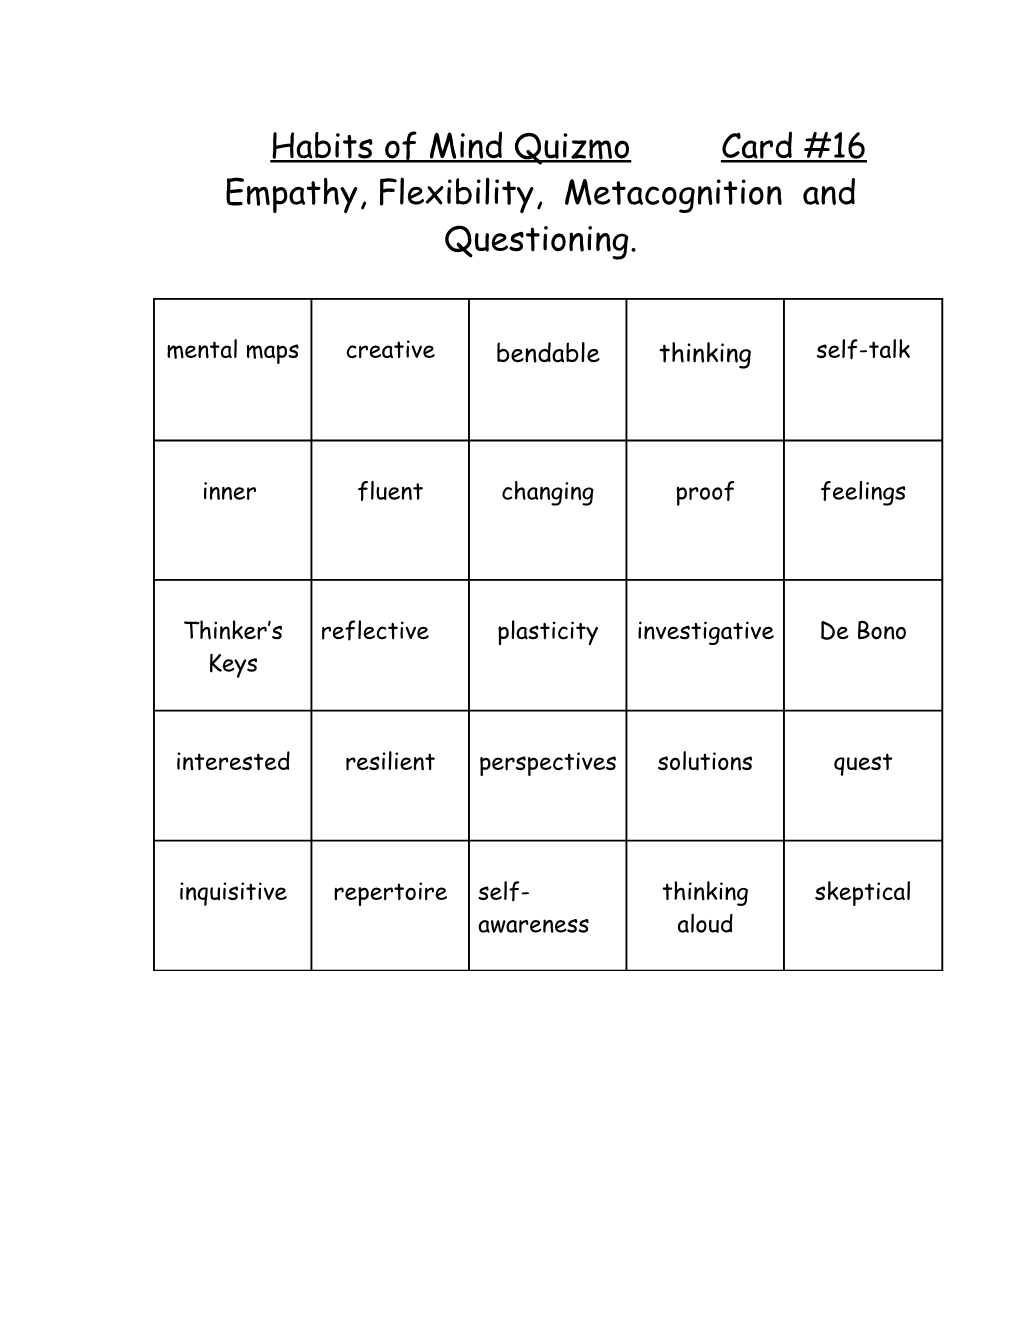 Empathy, Flexibility, Metacognition and Questioning